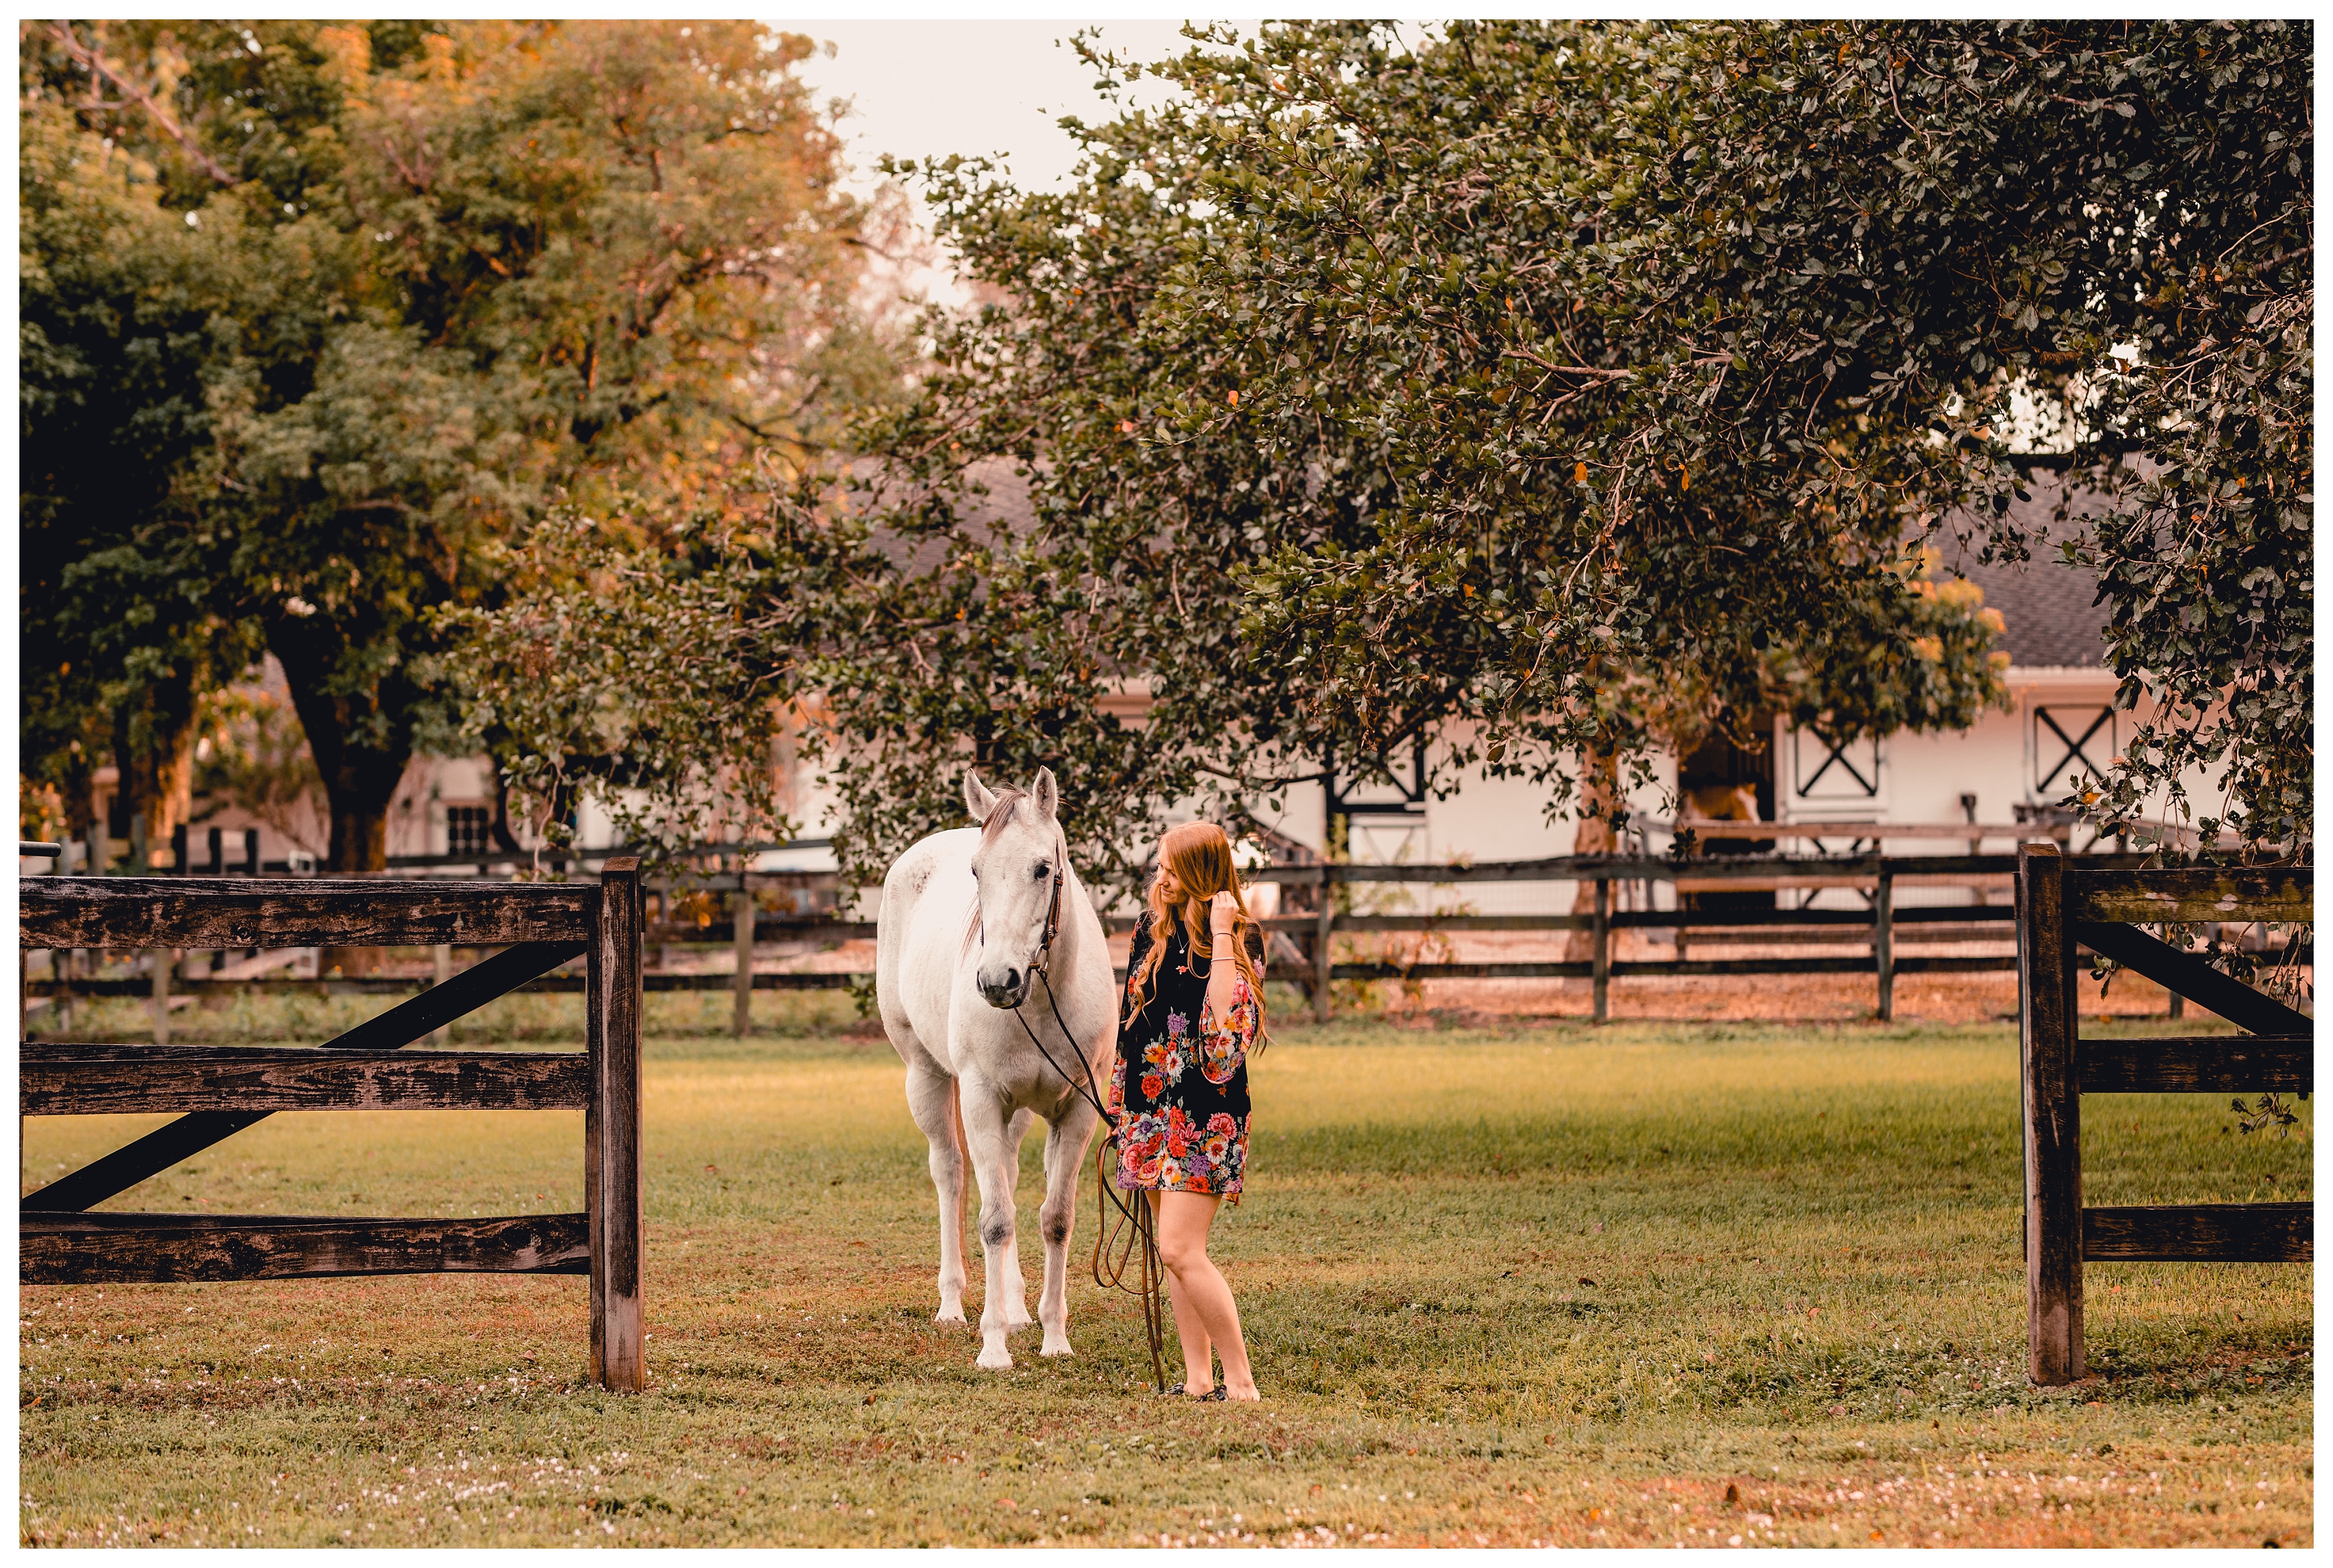 Golden hour photos of a horse and equestrian. Shelly Williams Photography